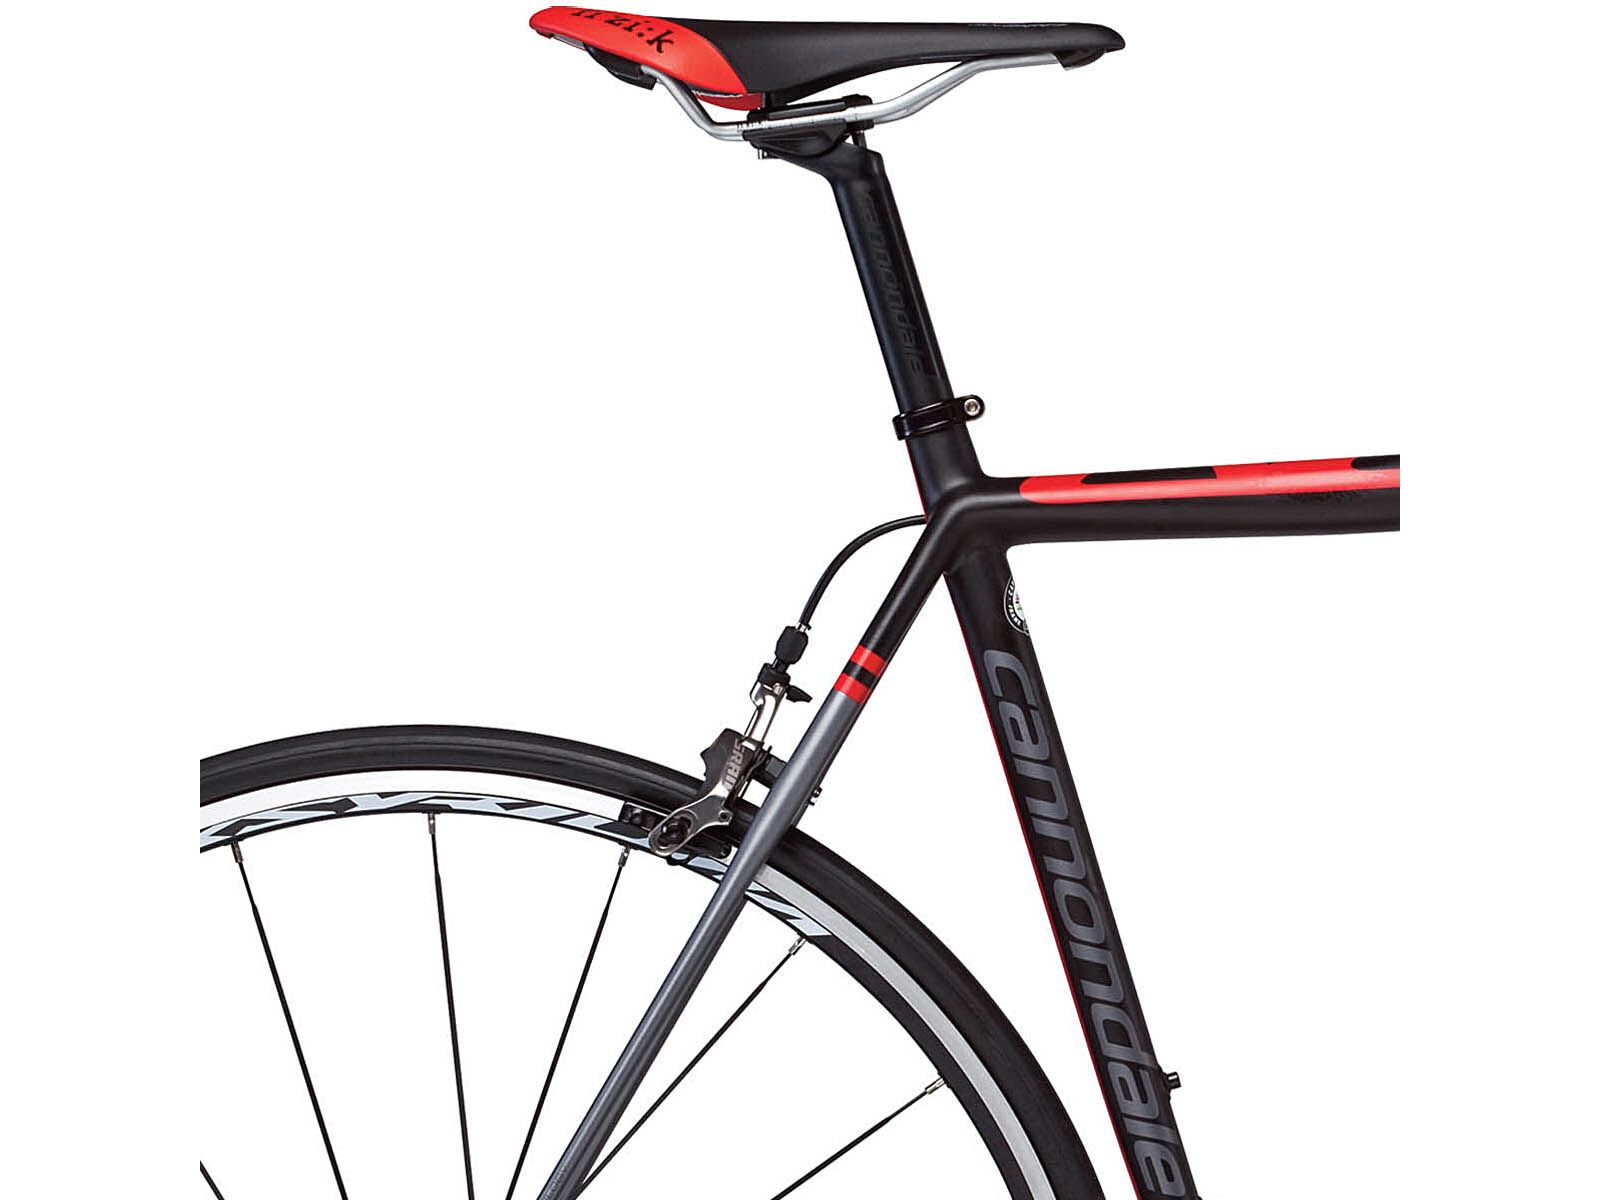 *** 2. Wahl *** Cannondale SuperSix Evo 2 Red 2013, exposed carbon w/ charcoal gray matte - Rennrad | Rahmenhöhe 58 cm | Bild 6